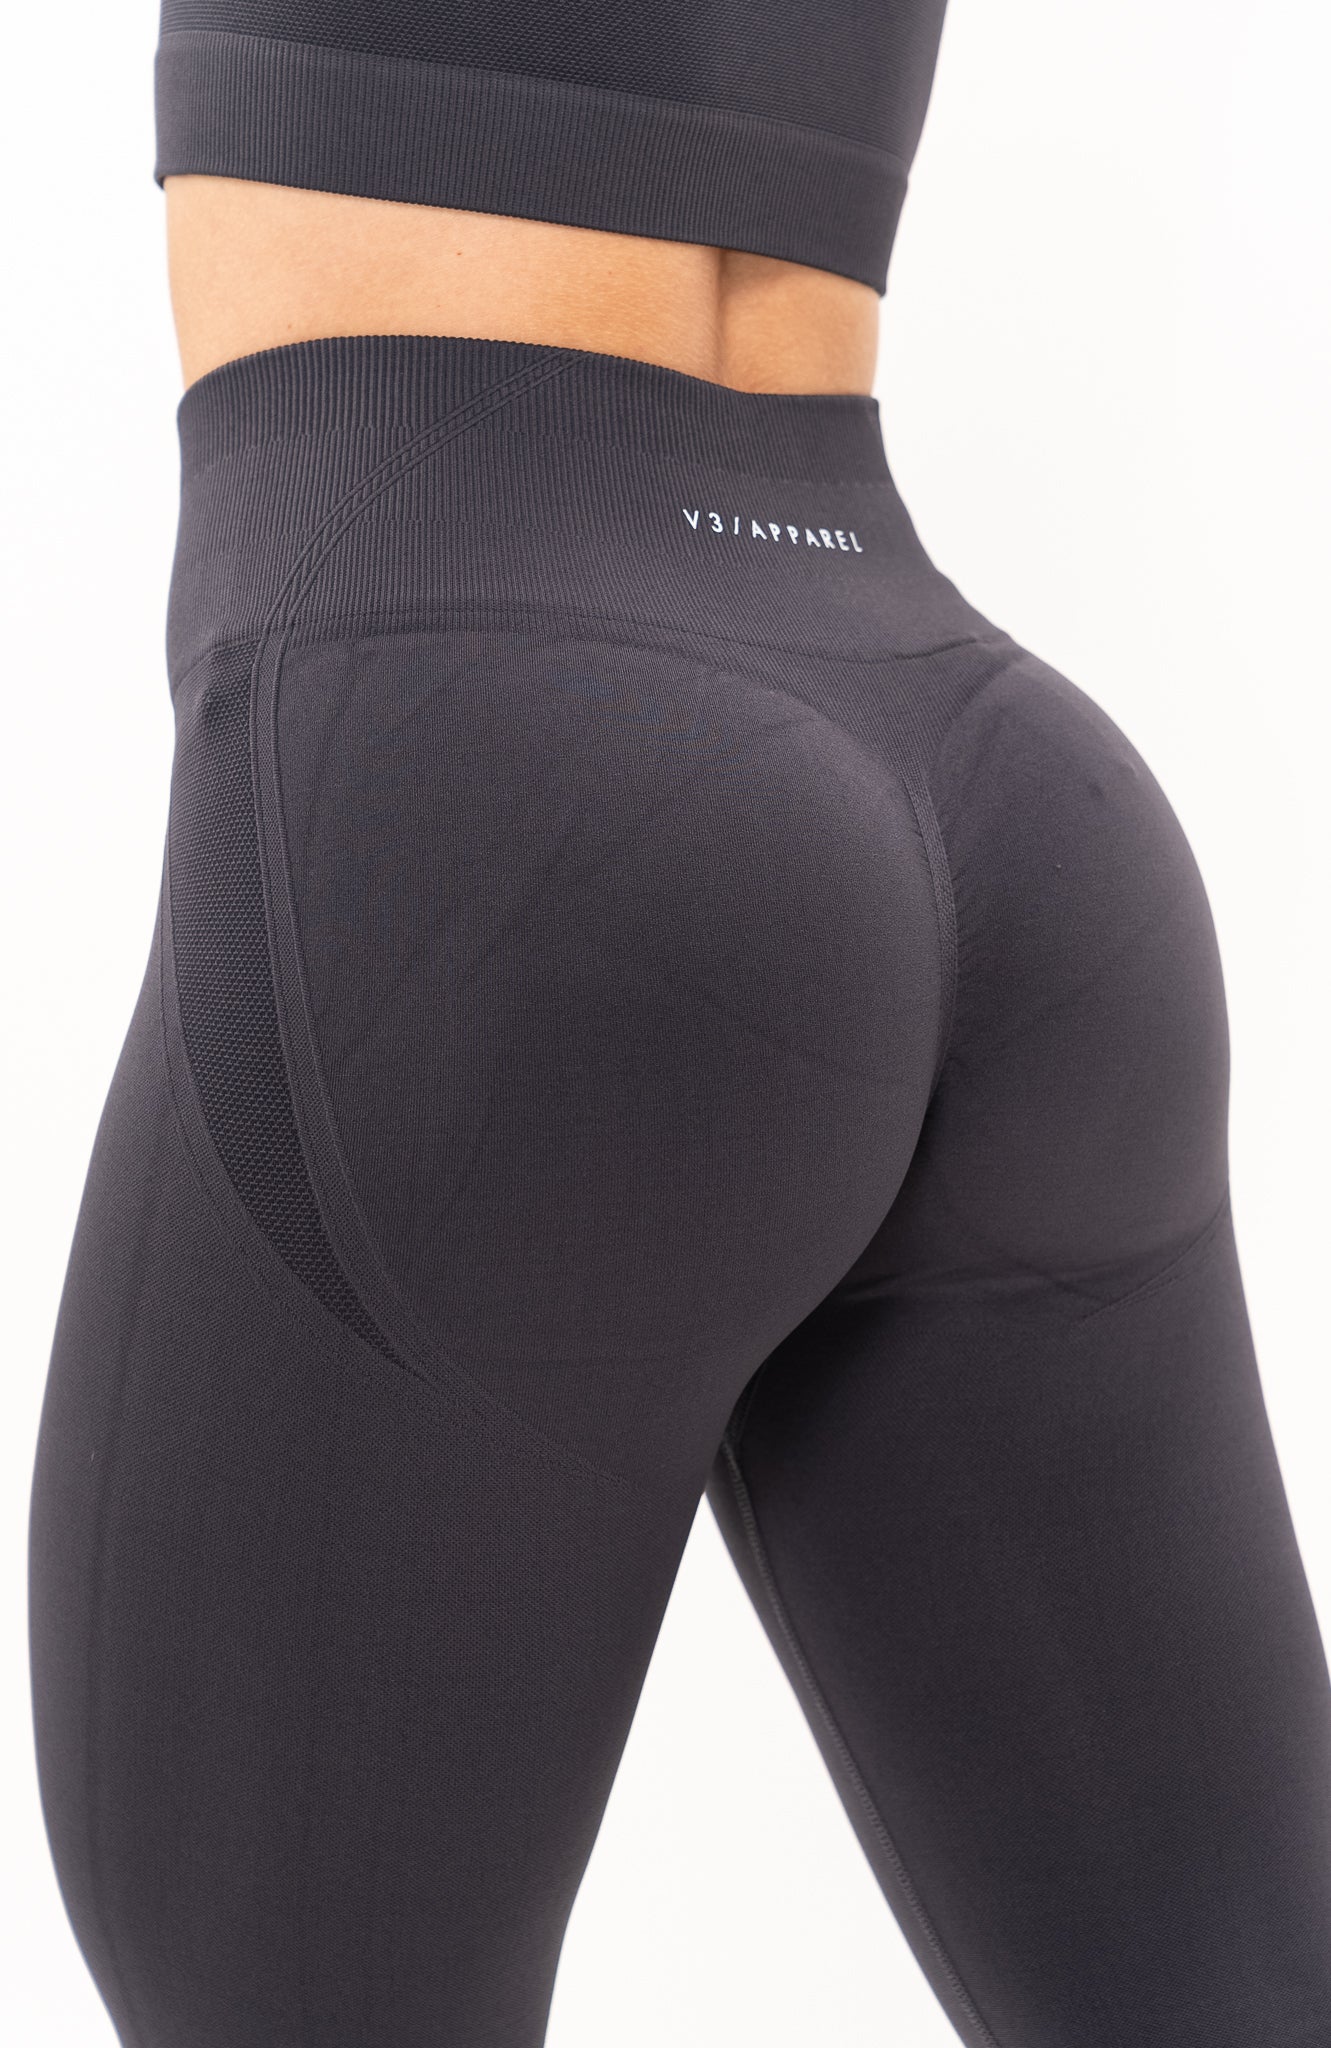 V3 Apparel Women's Tempo seamless scrunch bum shaping high waisted leggings in charcoal grey – Squat proof sports tights for Gym workouts training, Running, yoga, bodybuilding and bikini fitness.